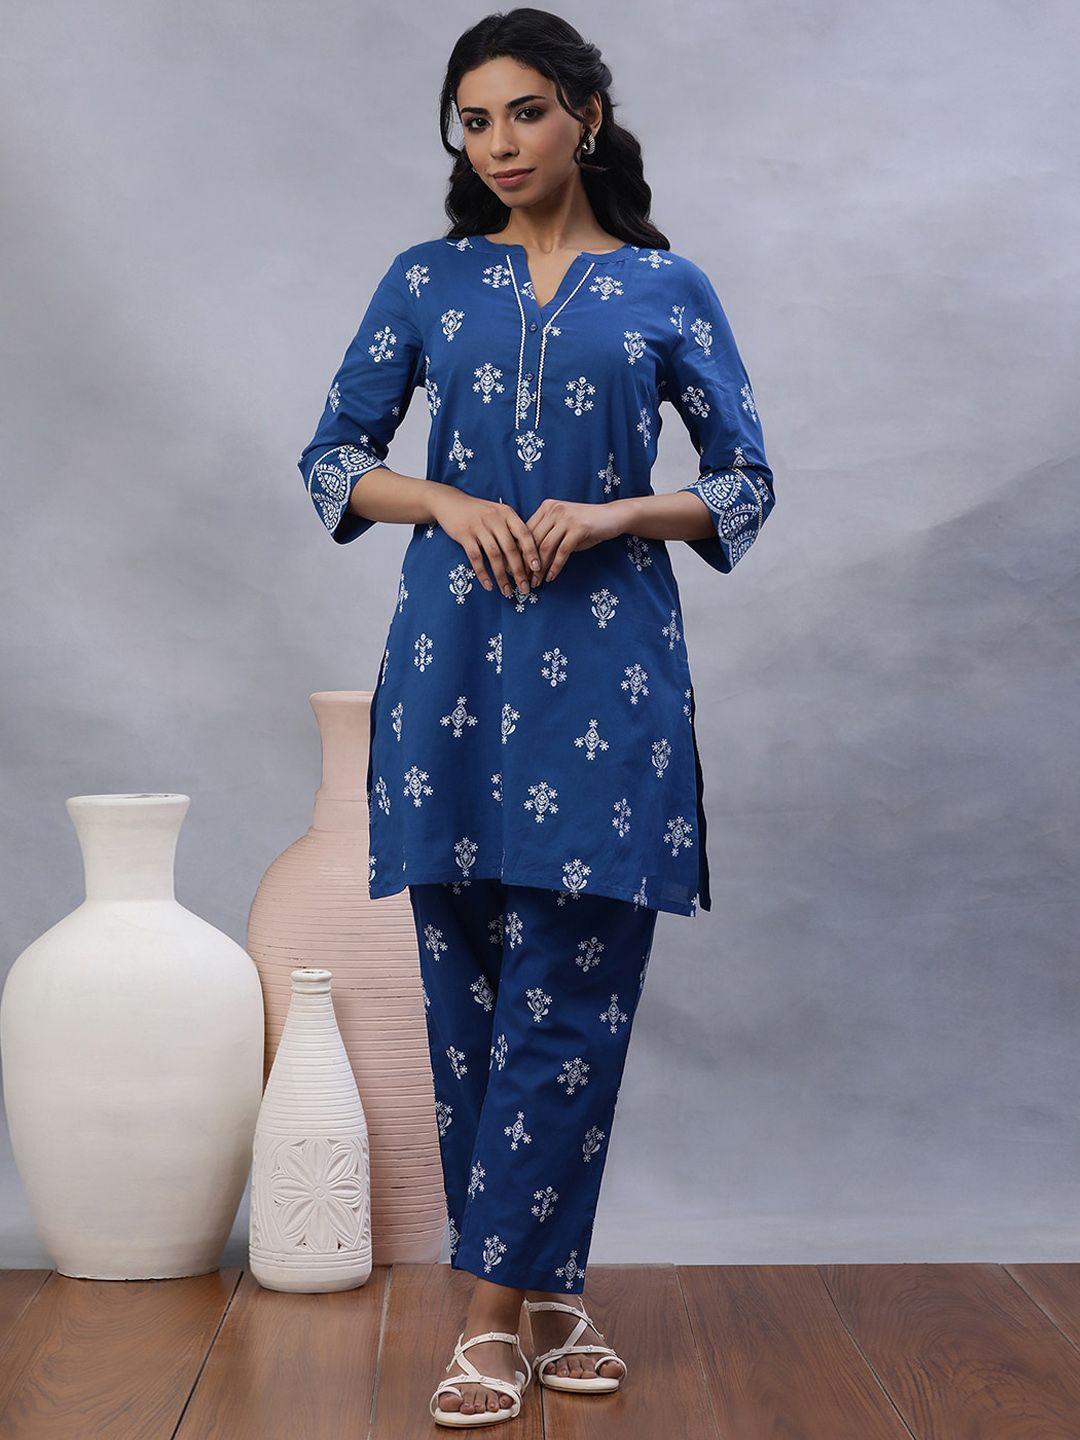 w printed pure cotton kurta with trousers